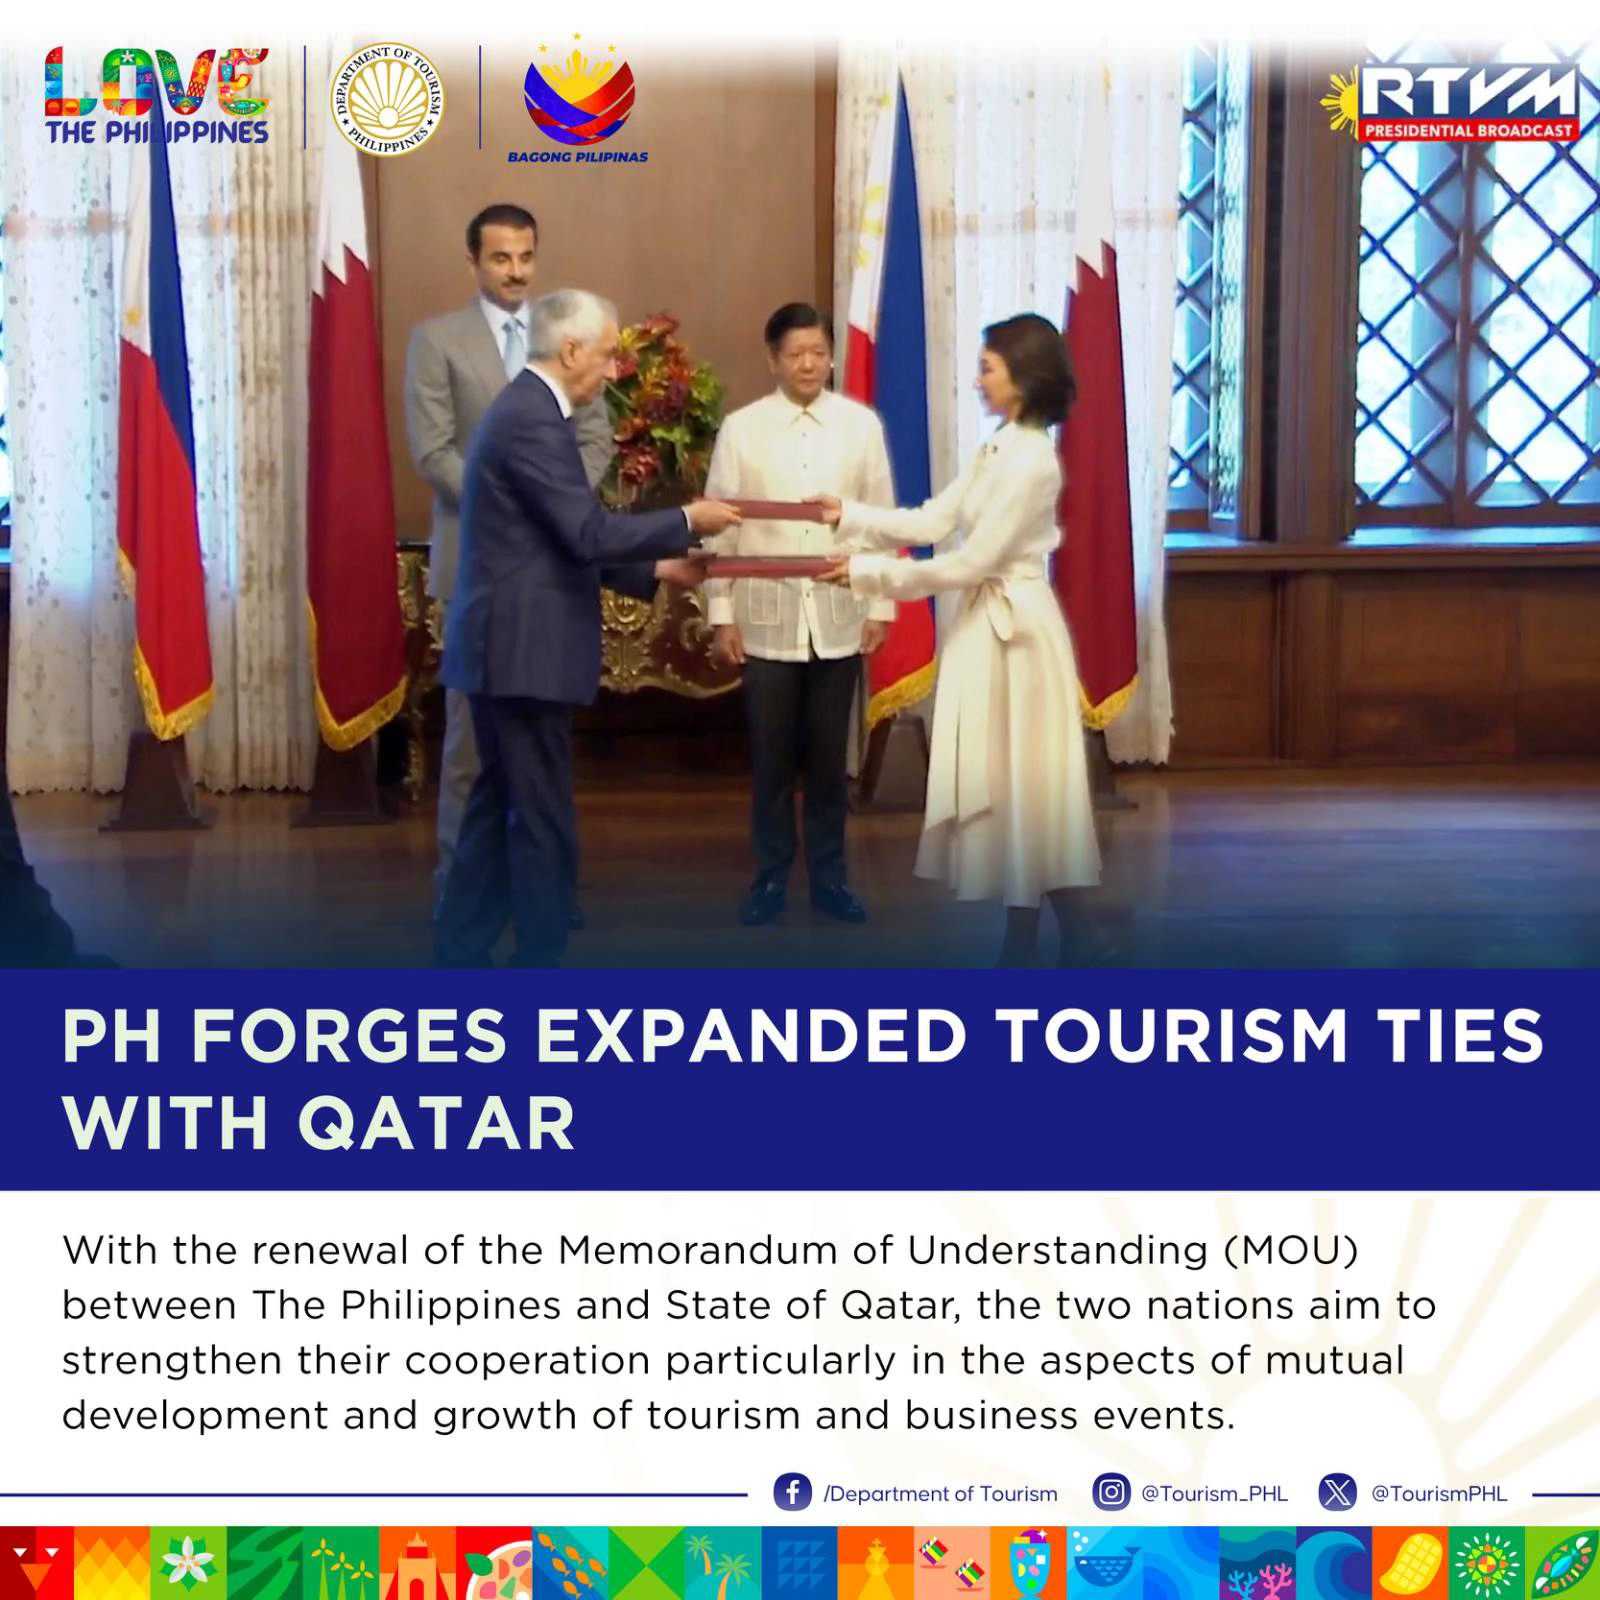 PH, Qatar sign MOU to strengthen cooperation in tourism sector